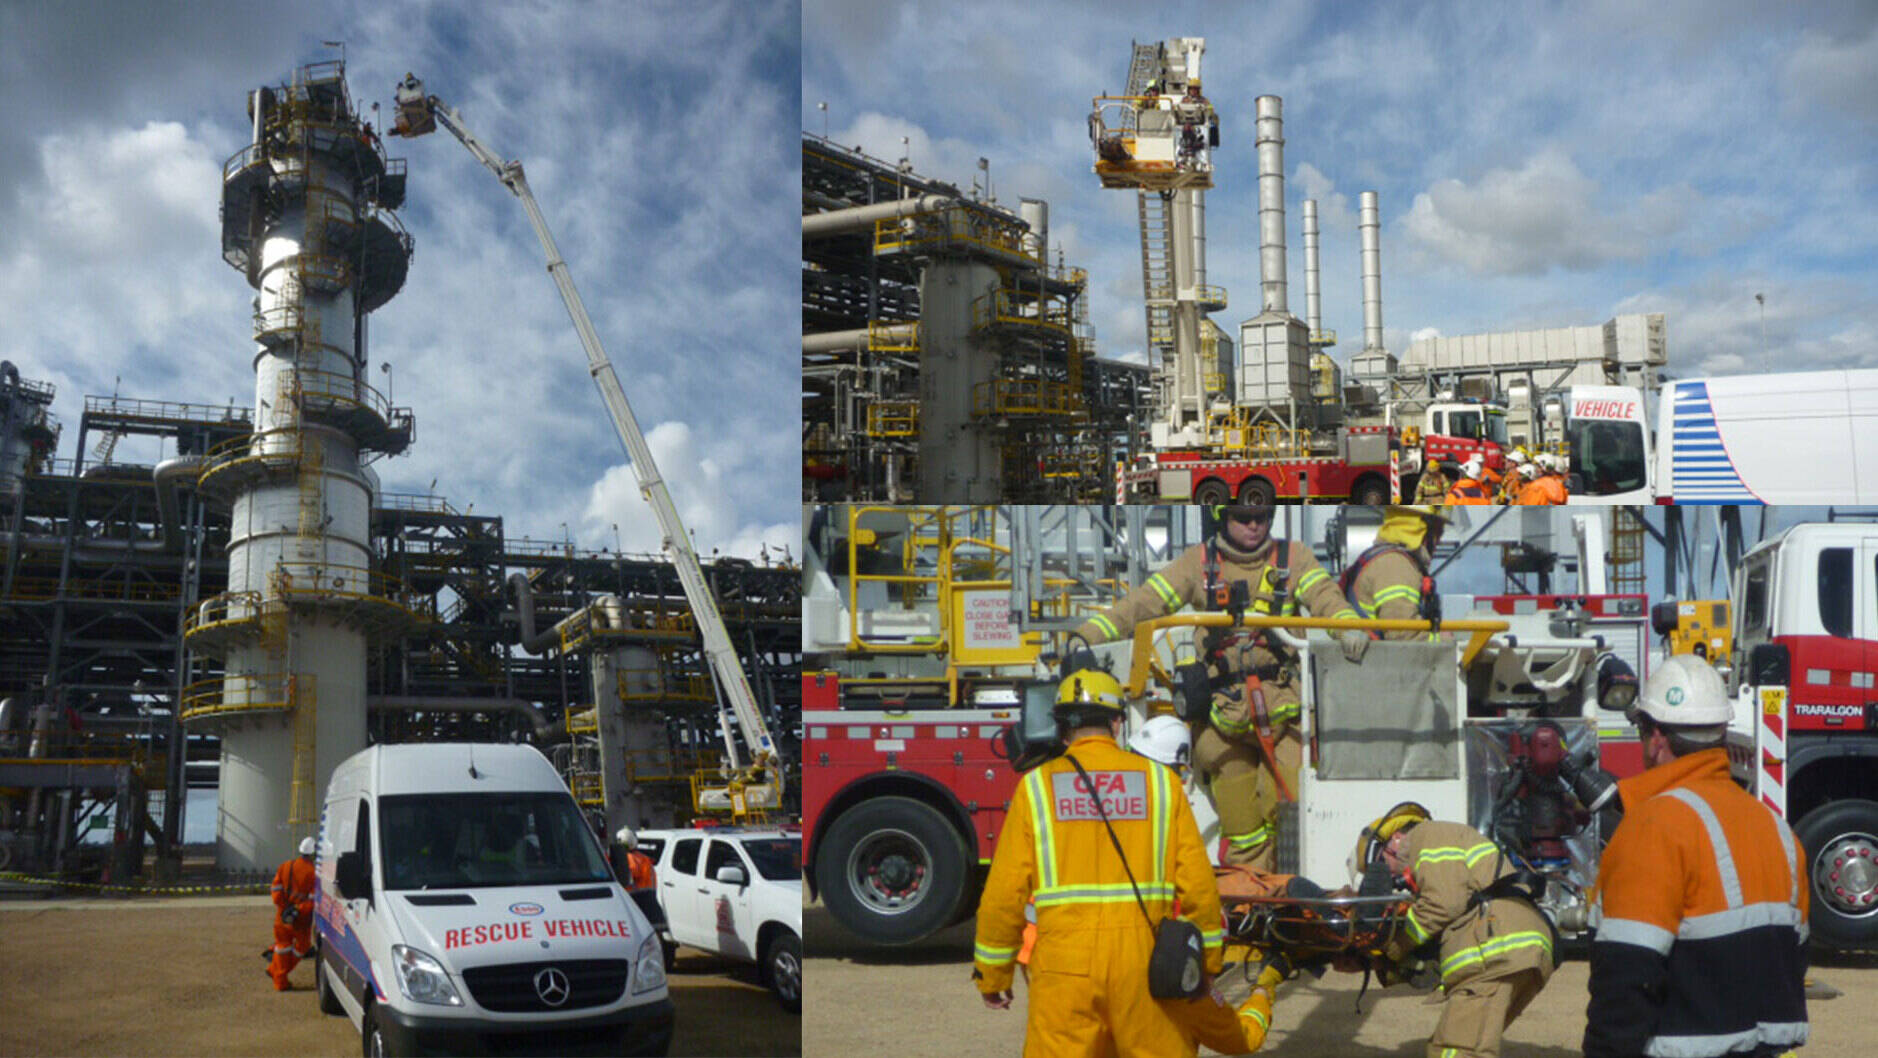 Image Photo — Longford Plants during the recent simulated emergency response exercise.